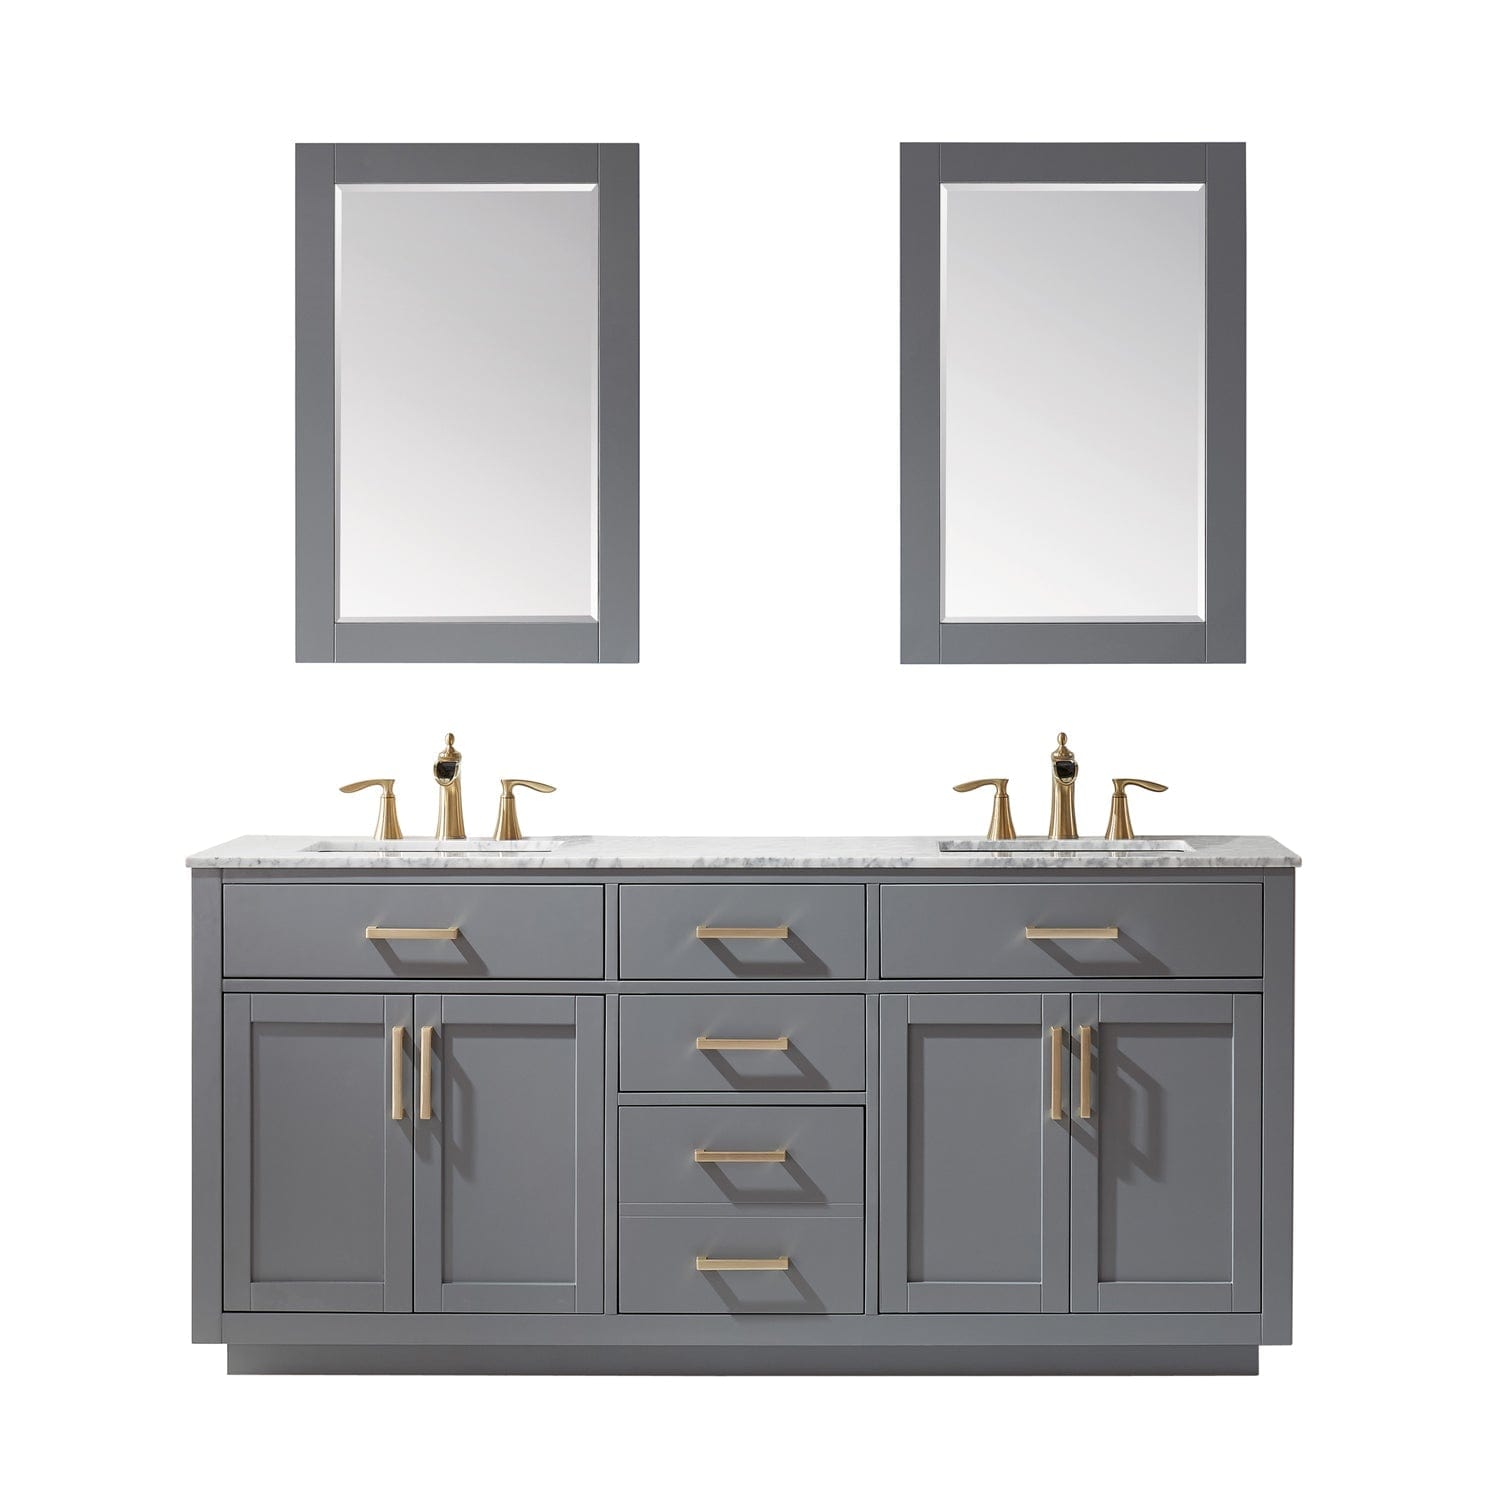 Altair Ivy 72" Double Bathroom Vanity Set in Gray and Carrara White Marble Countertop with Mirror 531072-GR-CA - Molaix631112971270Vanity531072-GR-CA